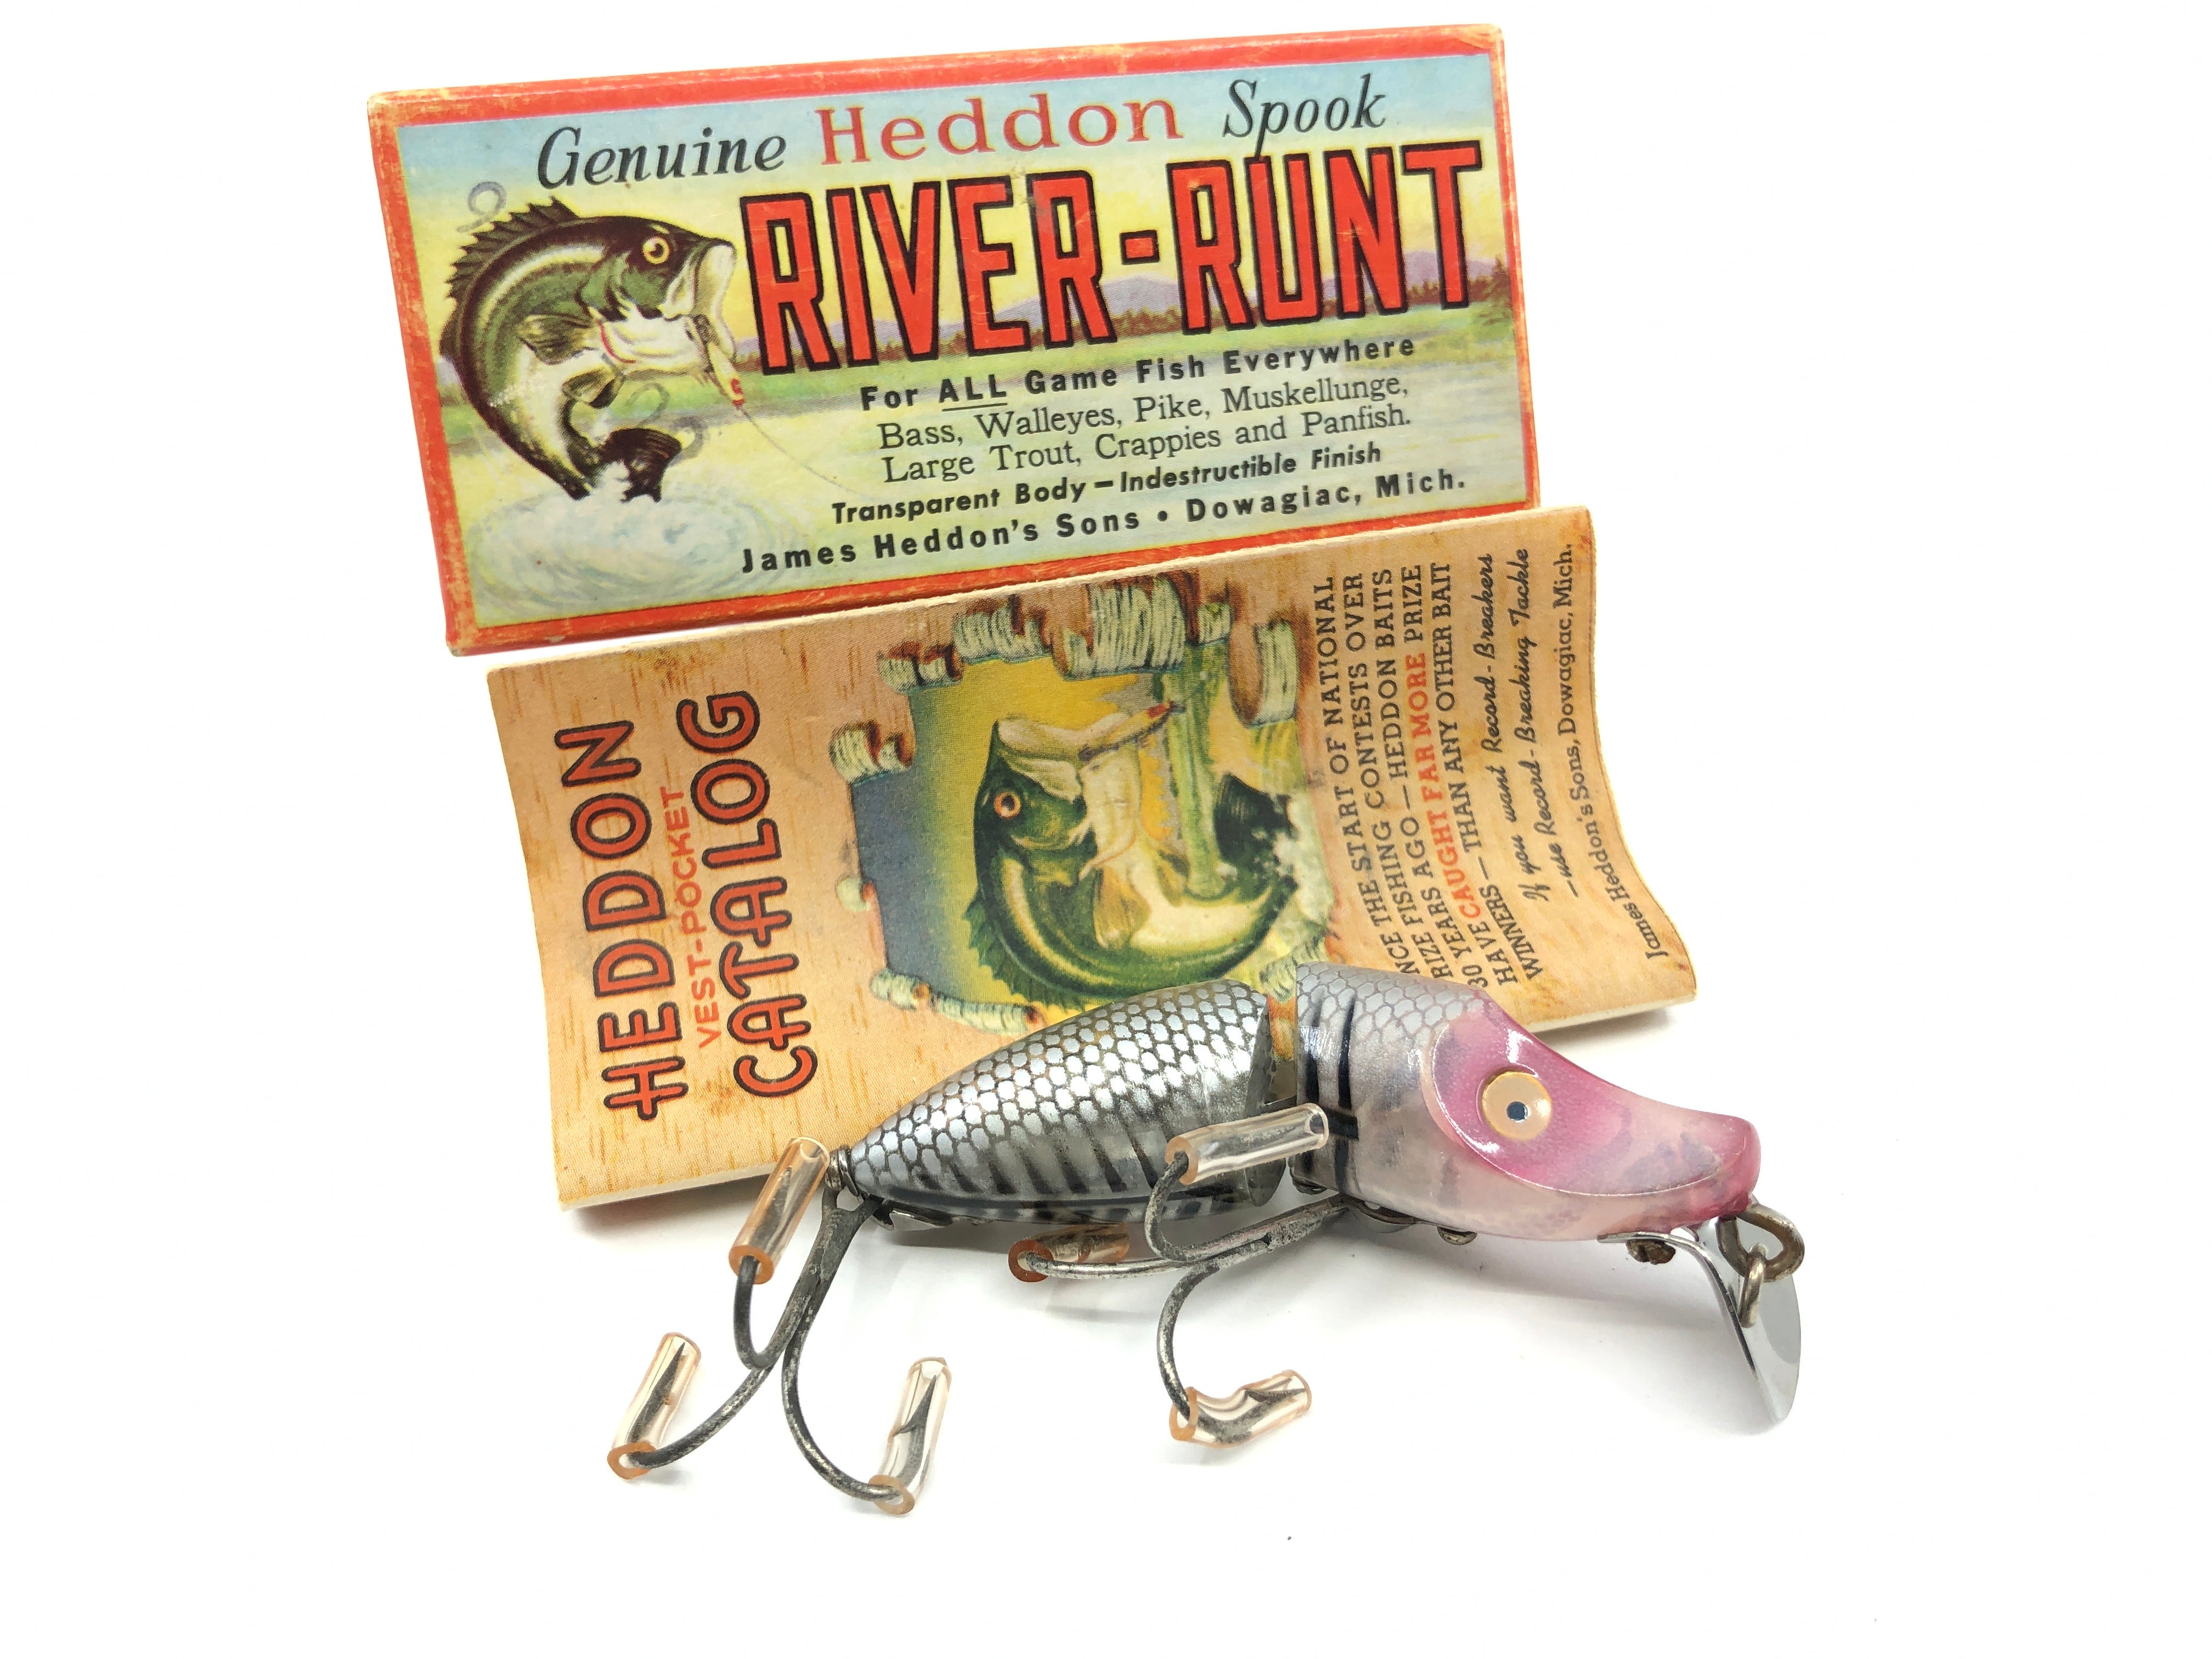 Heddon Jointed Sinker River Runt 9330 XRS Silver Shore Minnow